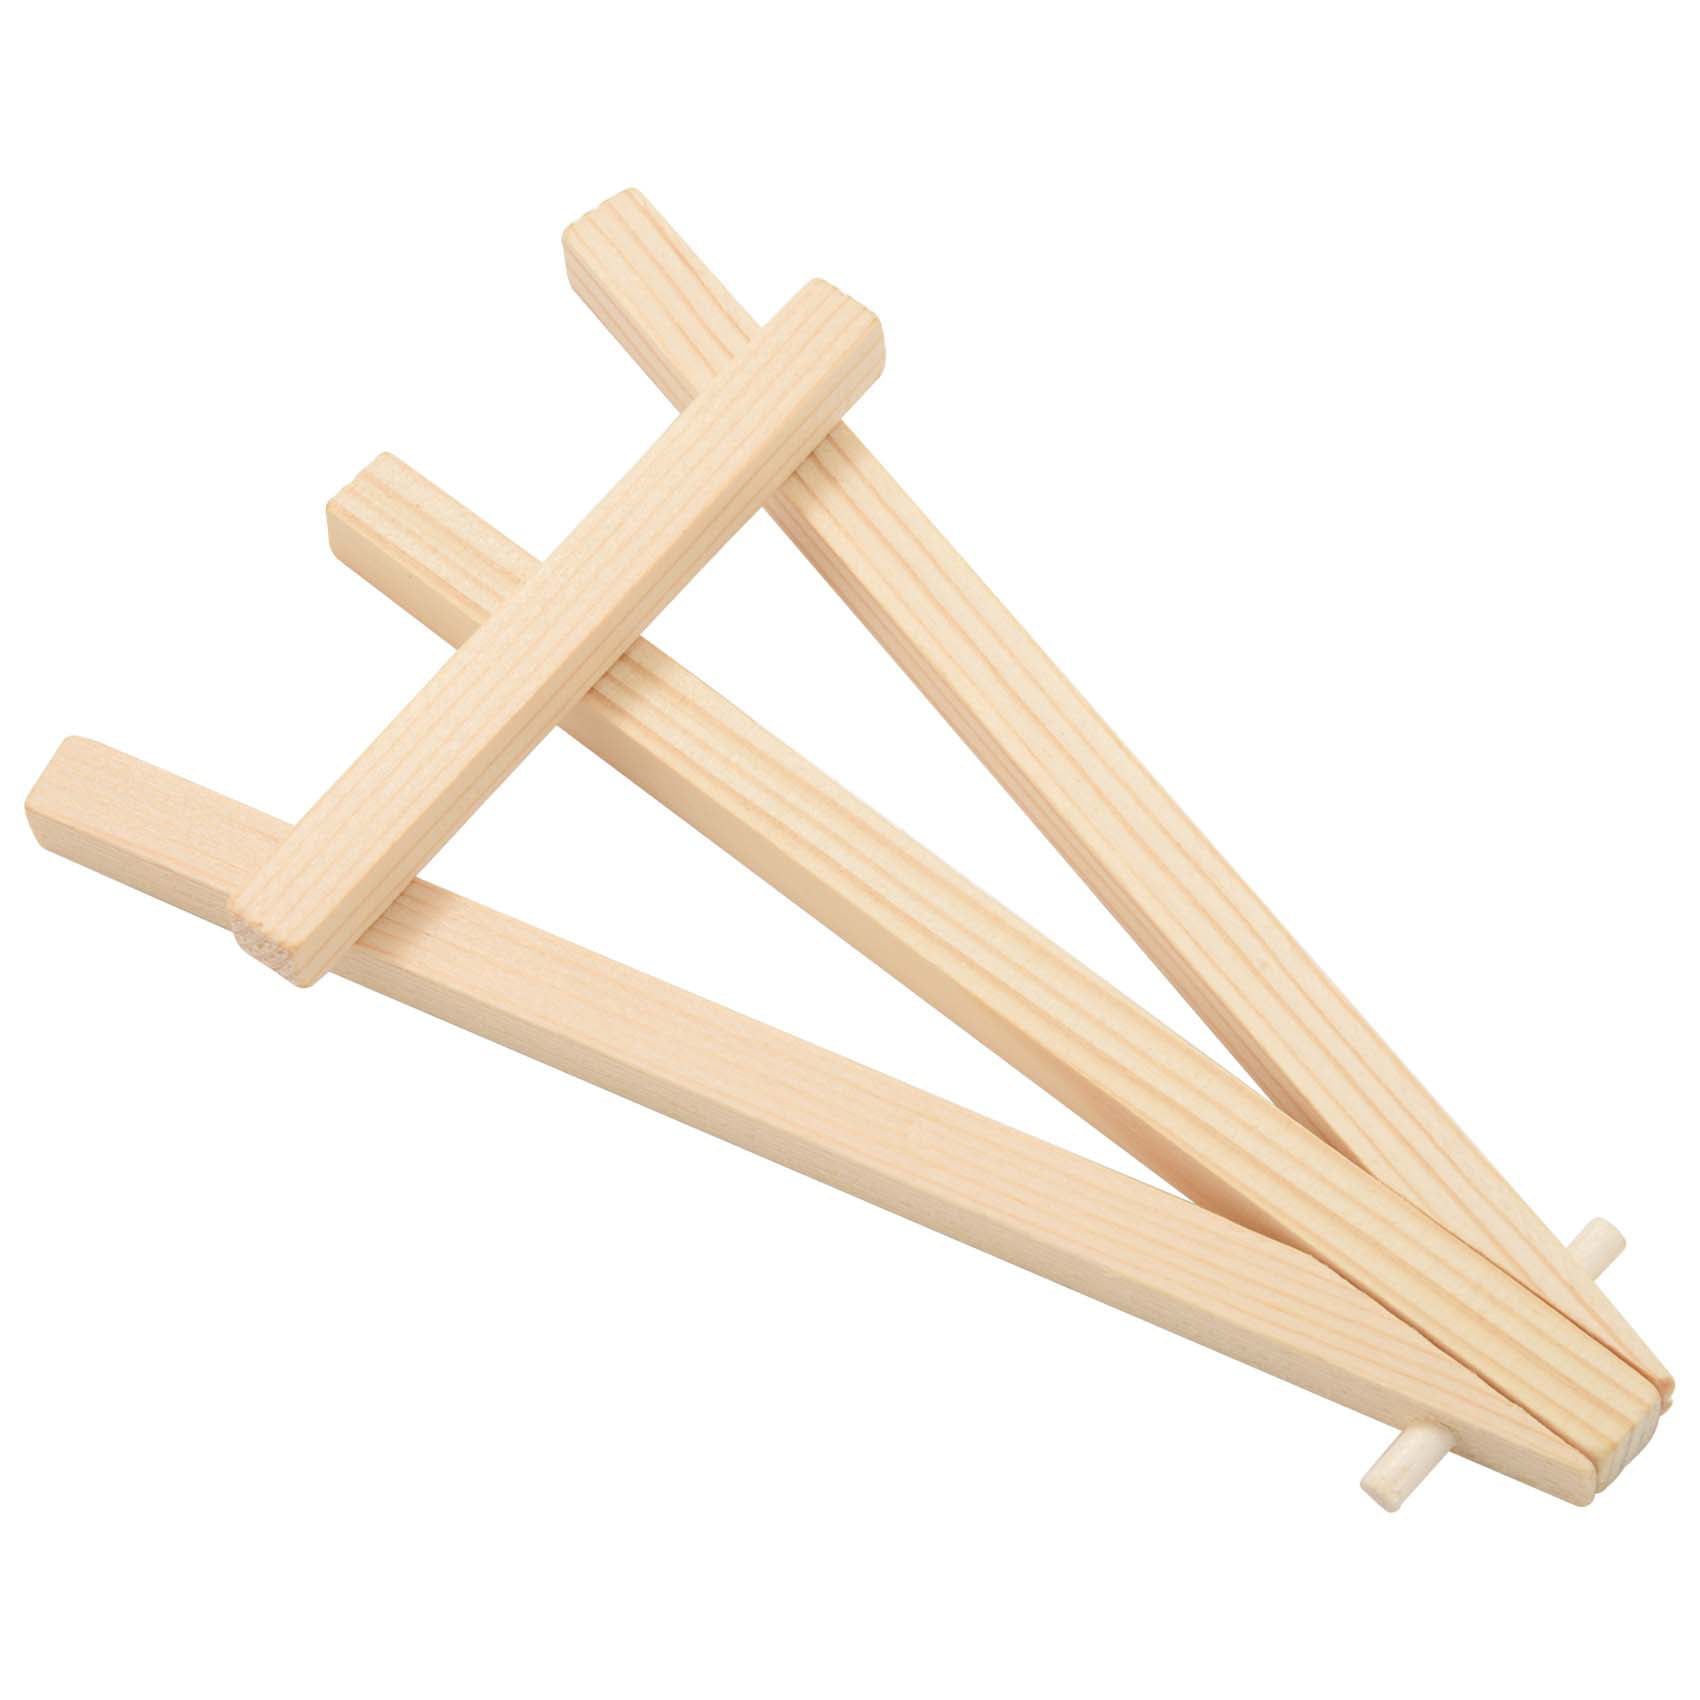 Buy Mini Wooden Easel (Pack of 24) at S&S Worldwide